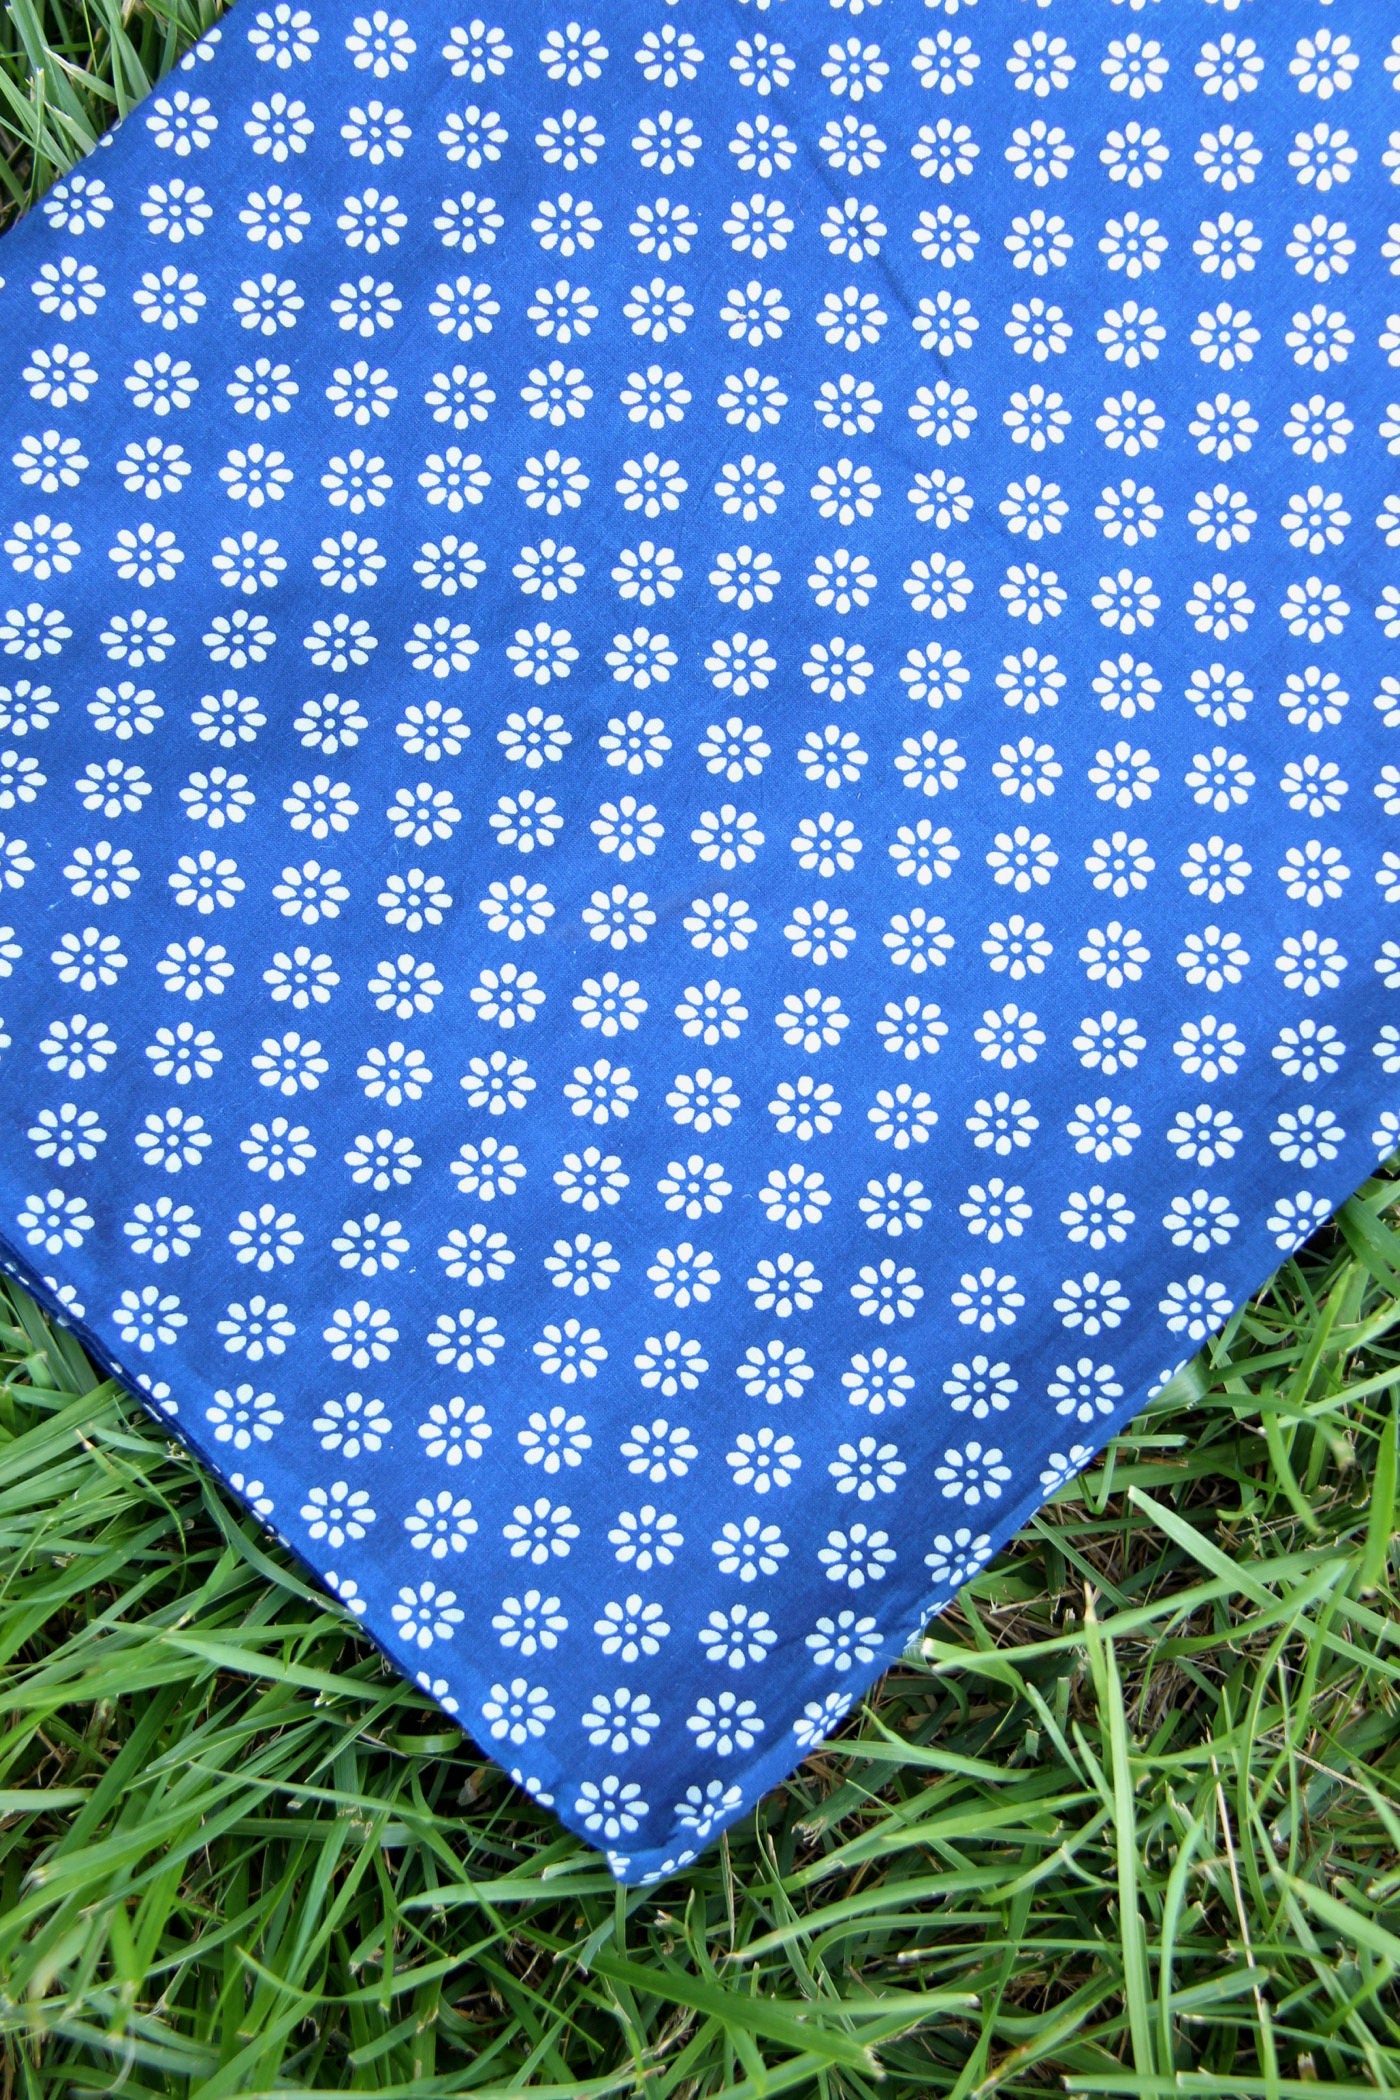 Hand Block Print 100% Cotton Fabric by the yard, Blue and White Floral Motif